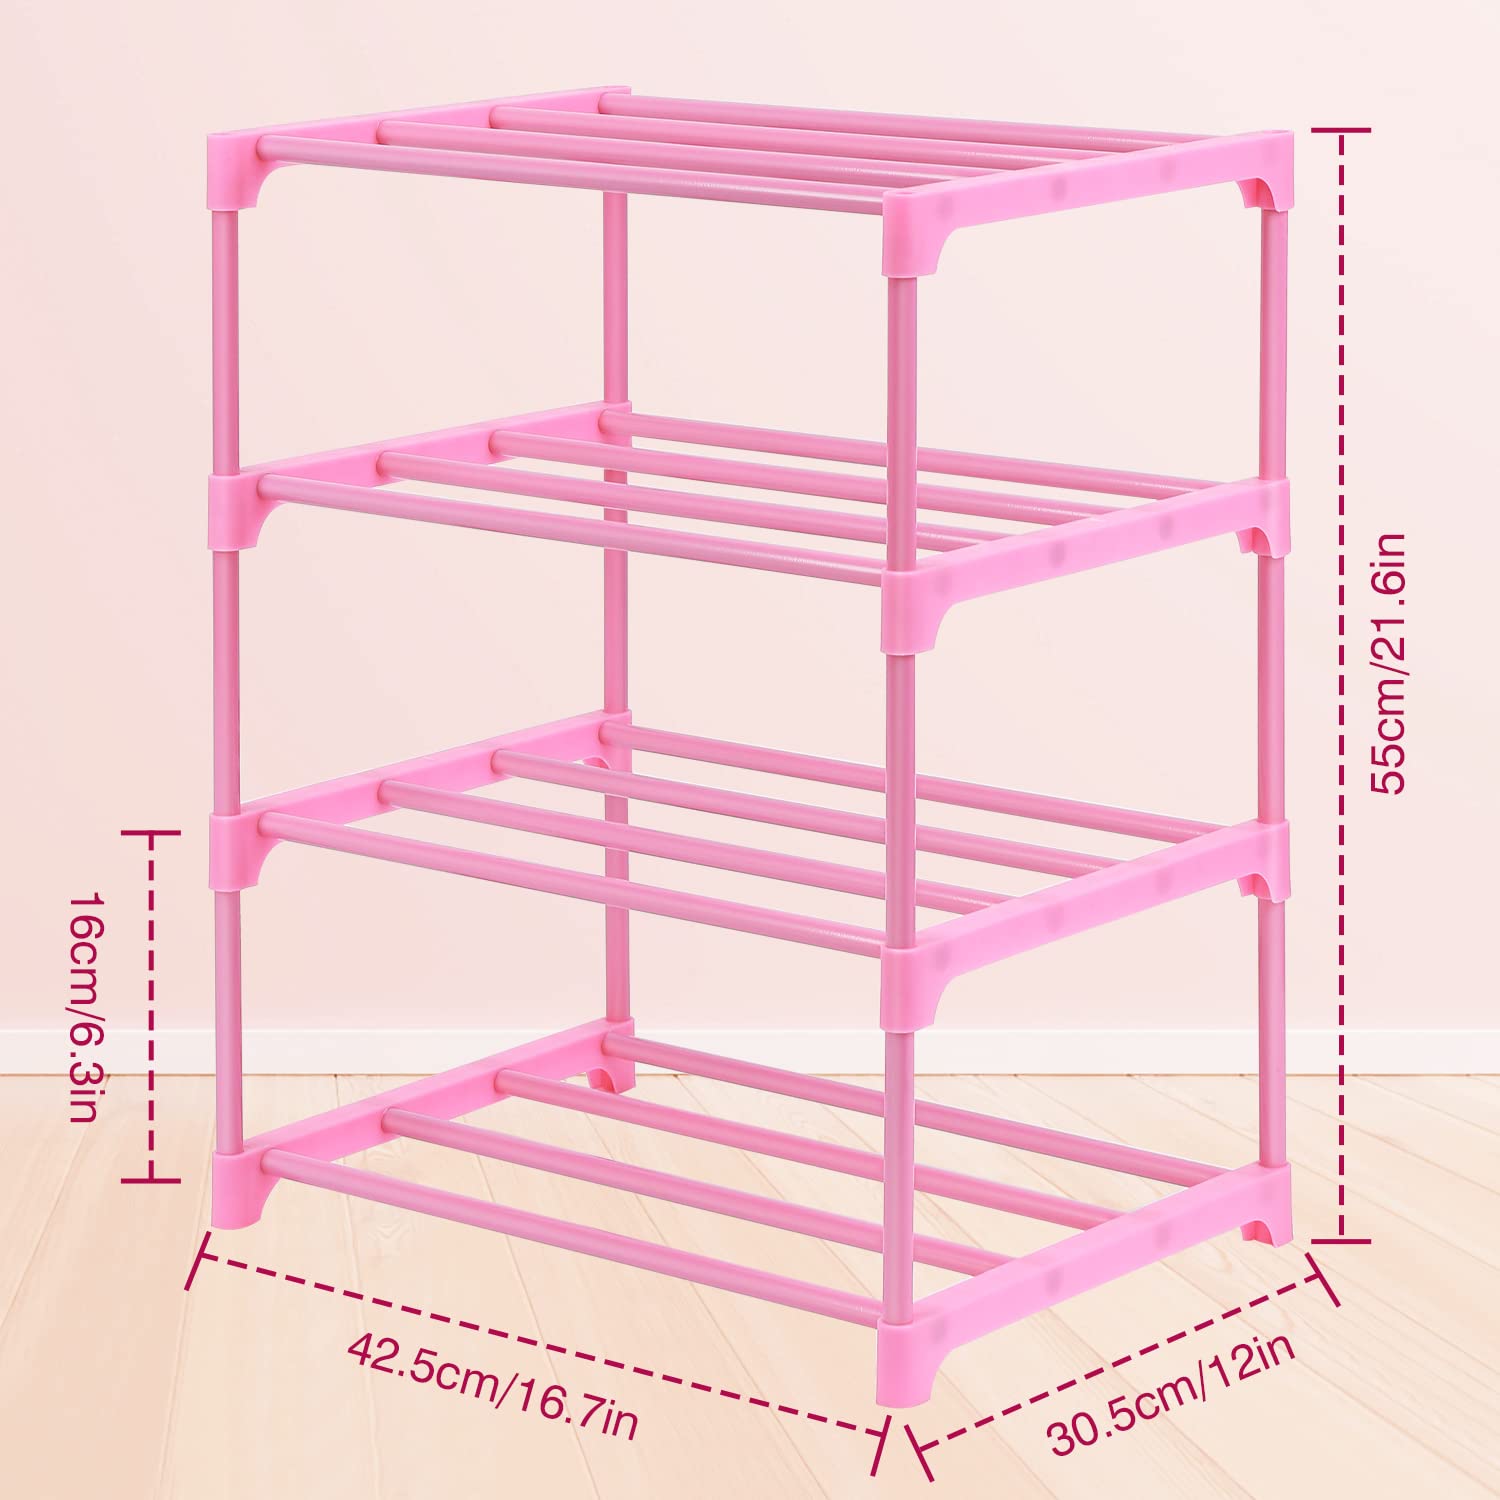 HITHIM 4-Tier Free Standing Shoe Racks for 6-8 Pairs Shoe Storage,Kids Shoe Racks for Small Place,Lightweight Stackable Shoe Shelf Organizer for Entryway, Doorway and Closet,Pink